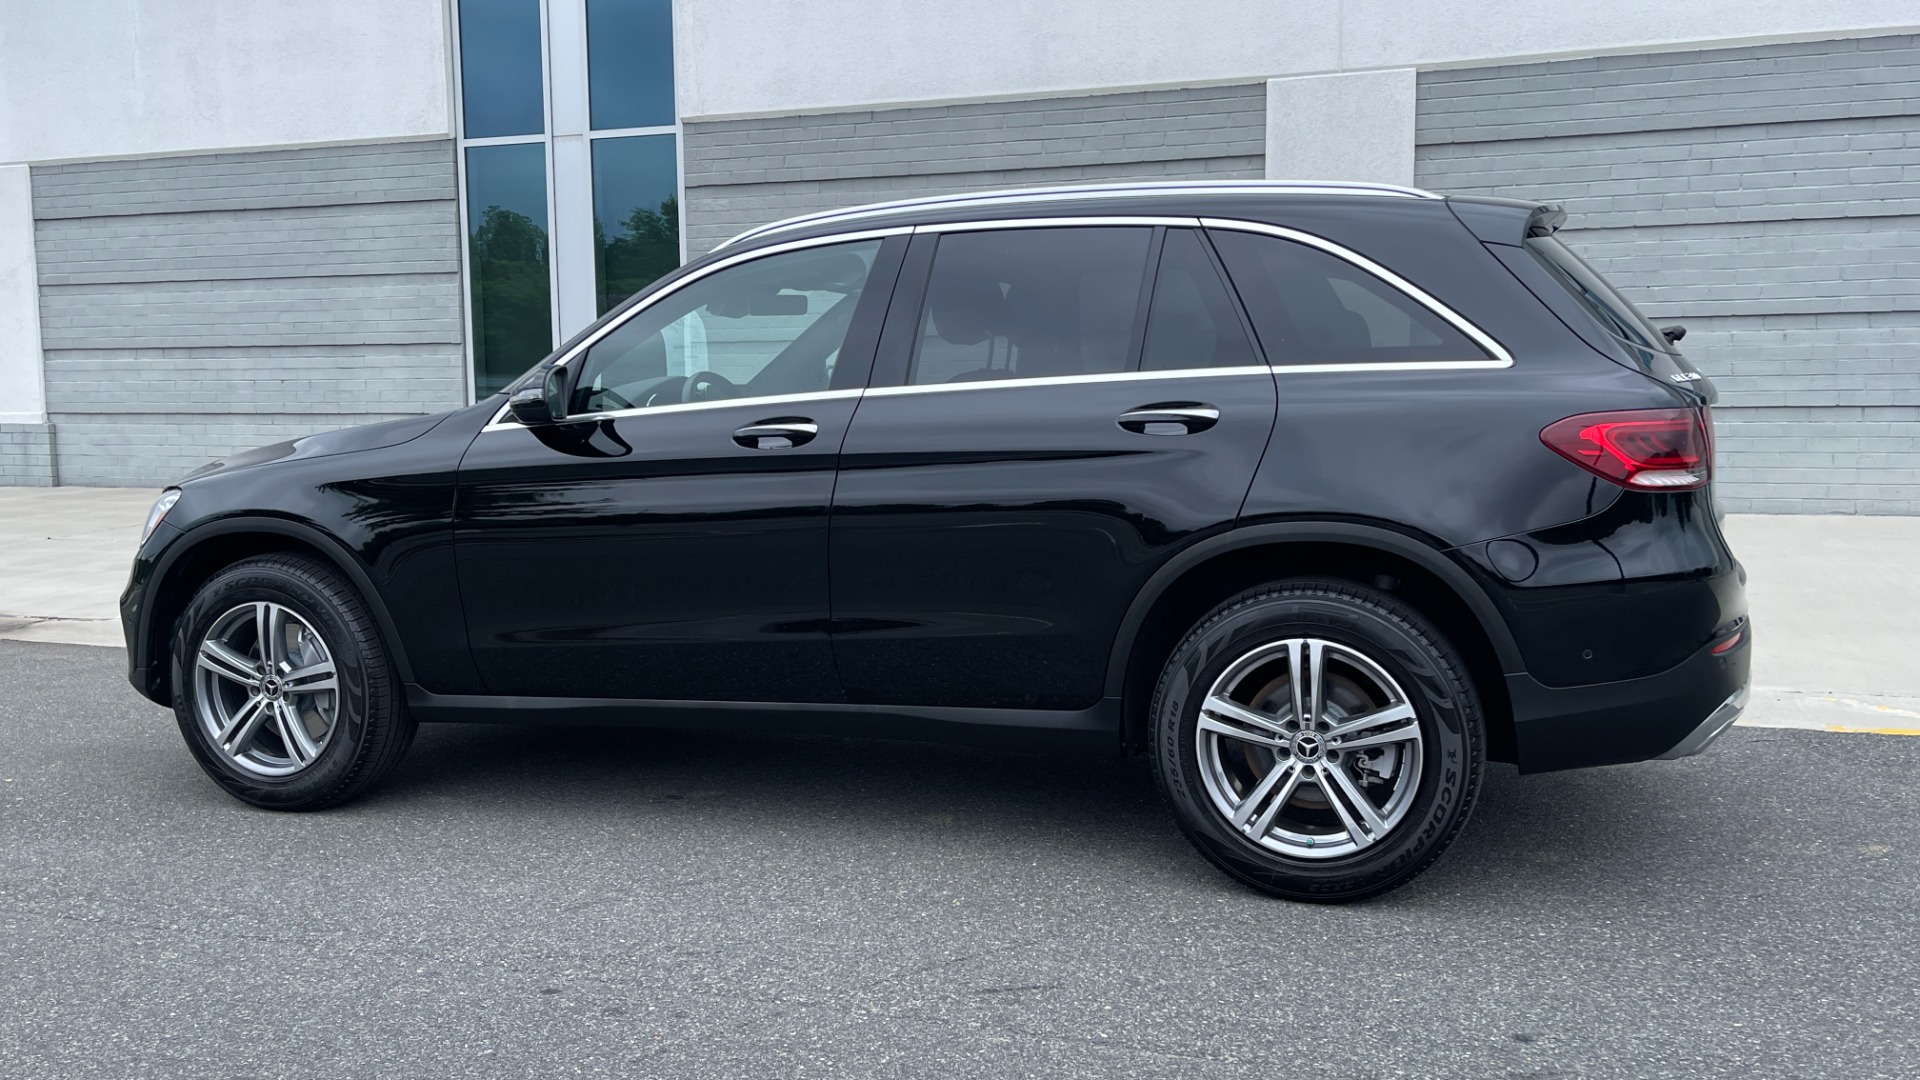 Used 2021 Mercedes-Benz GLC GLC 300 / 4MATIC / DASHCAM / PANORAMIC ROOF / WIRELESS CHARING / PREMIUM for sale $44,995 at Formula Imports in Charlotte NC 28227 3